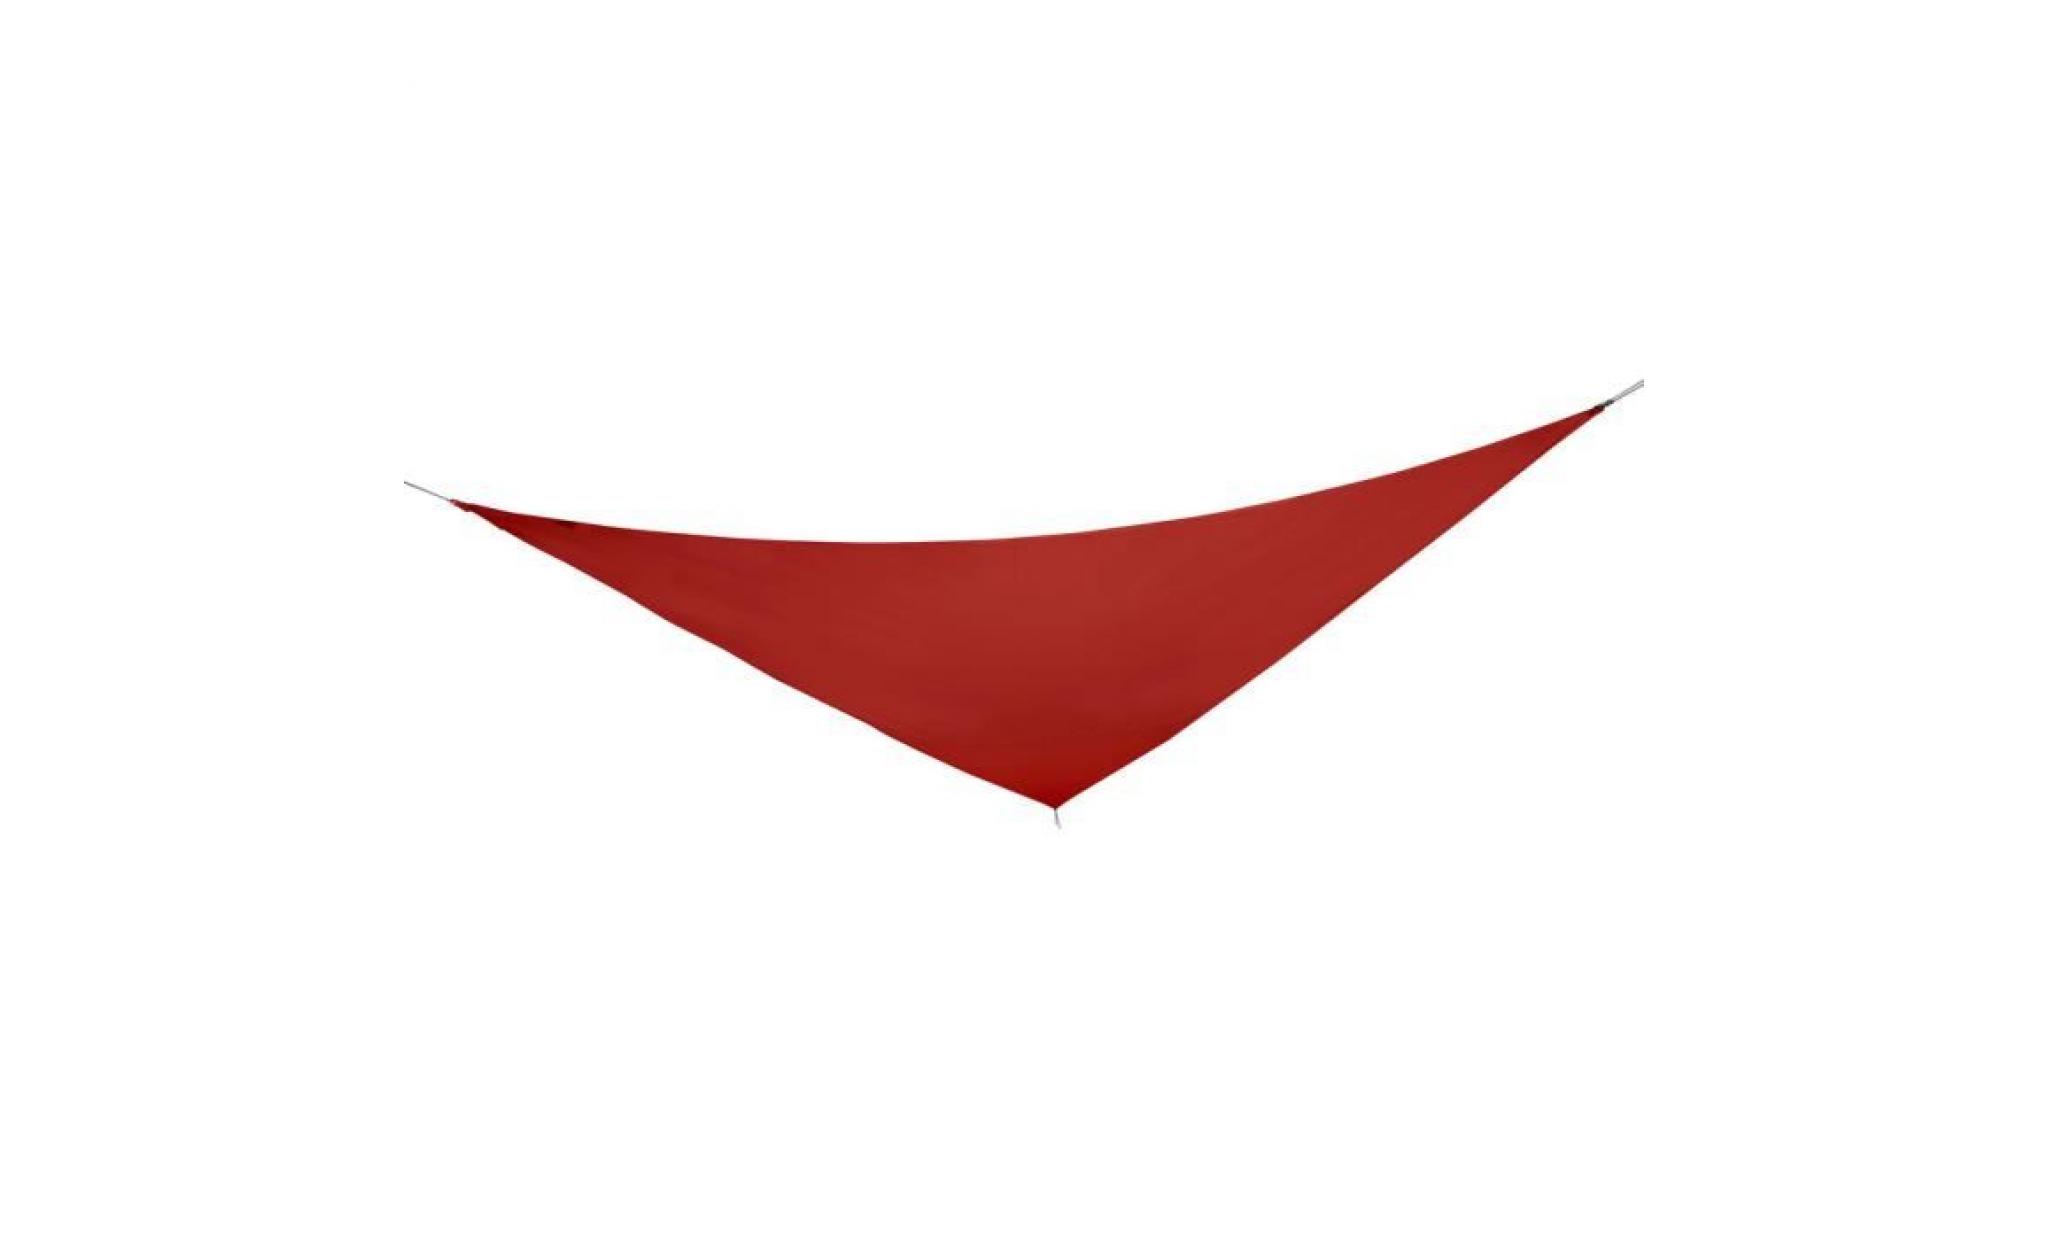 voile d'ombrage triangulaire en polyester 160 g m² 3.6x3.6m rouge